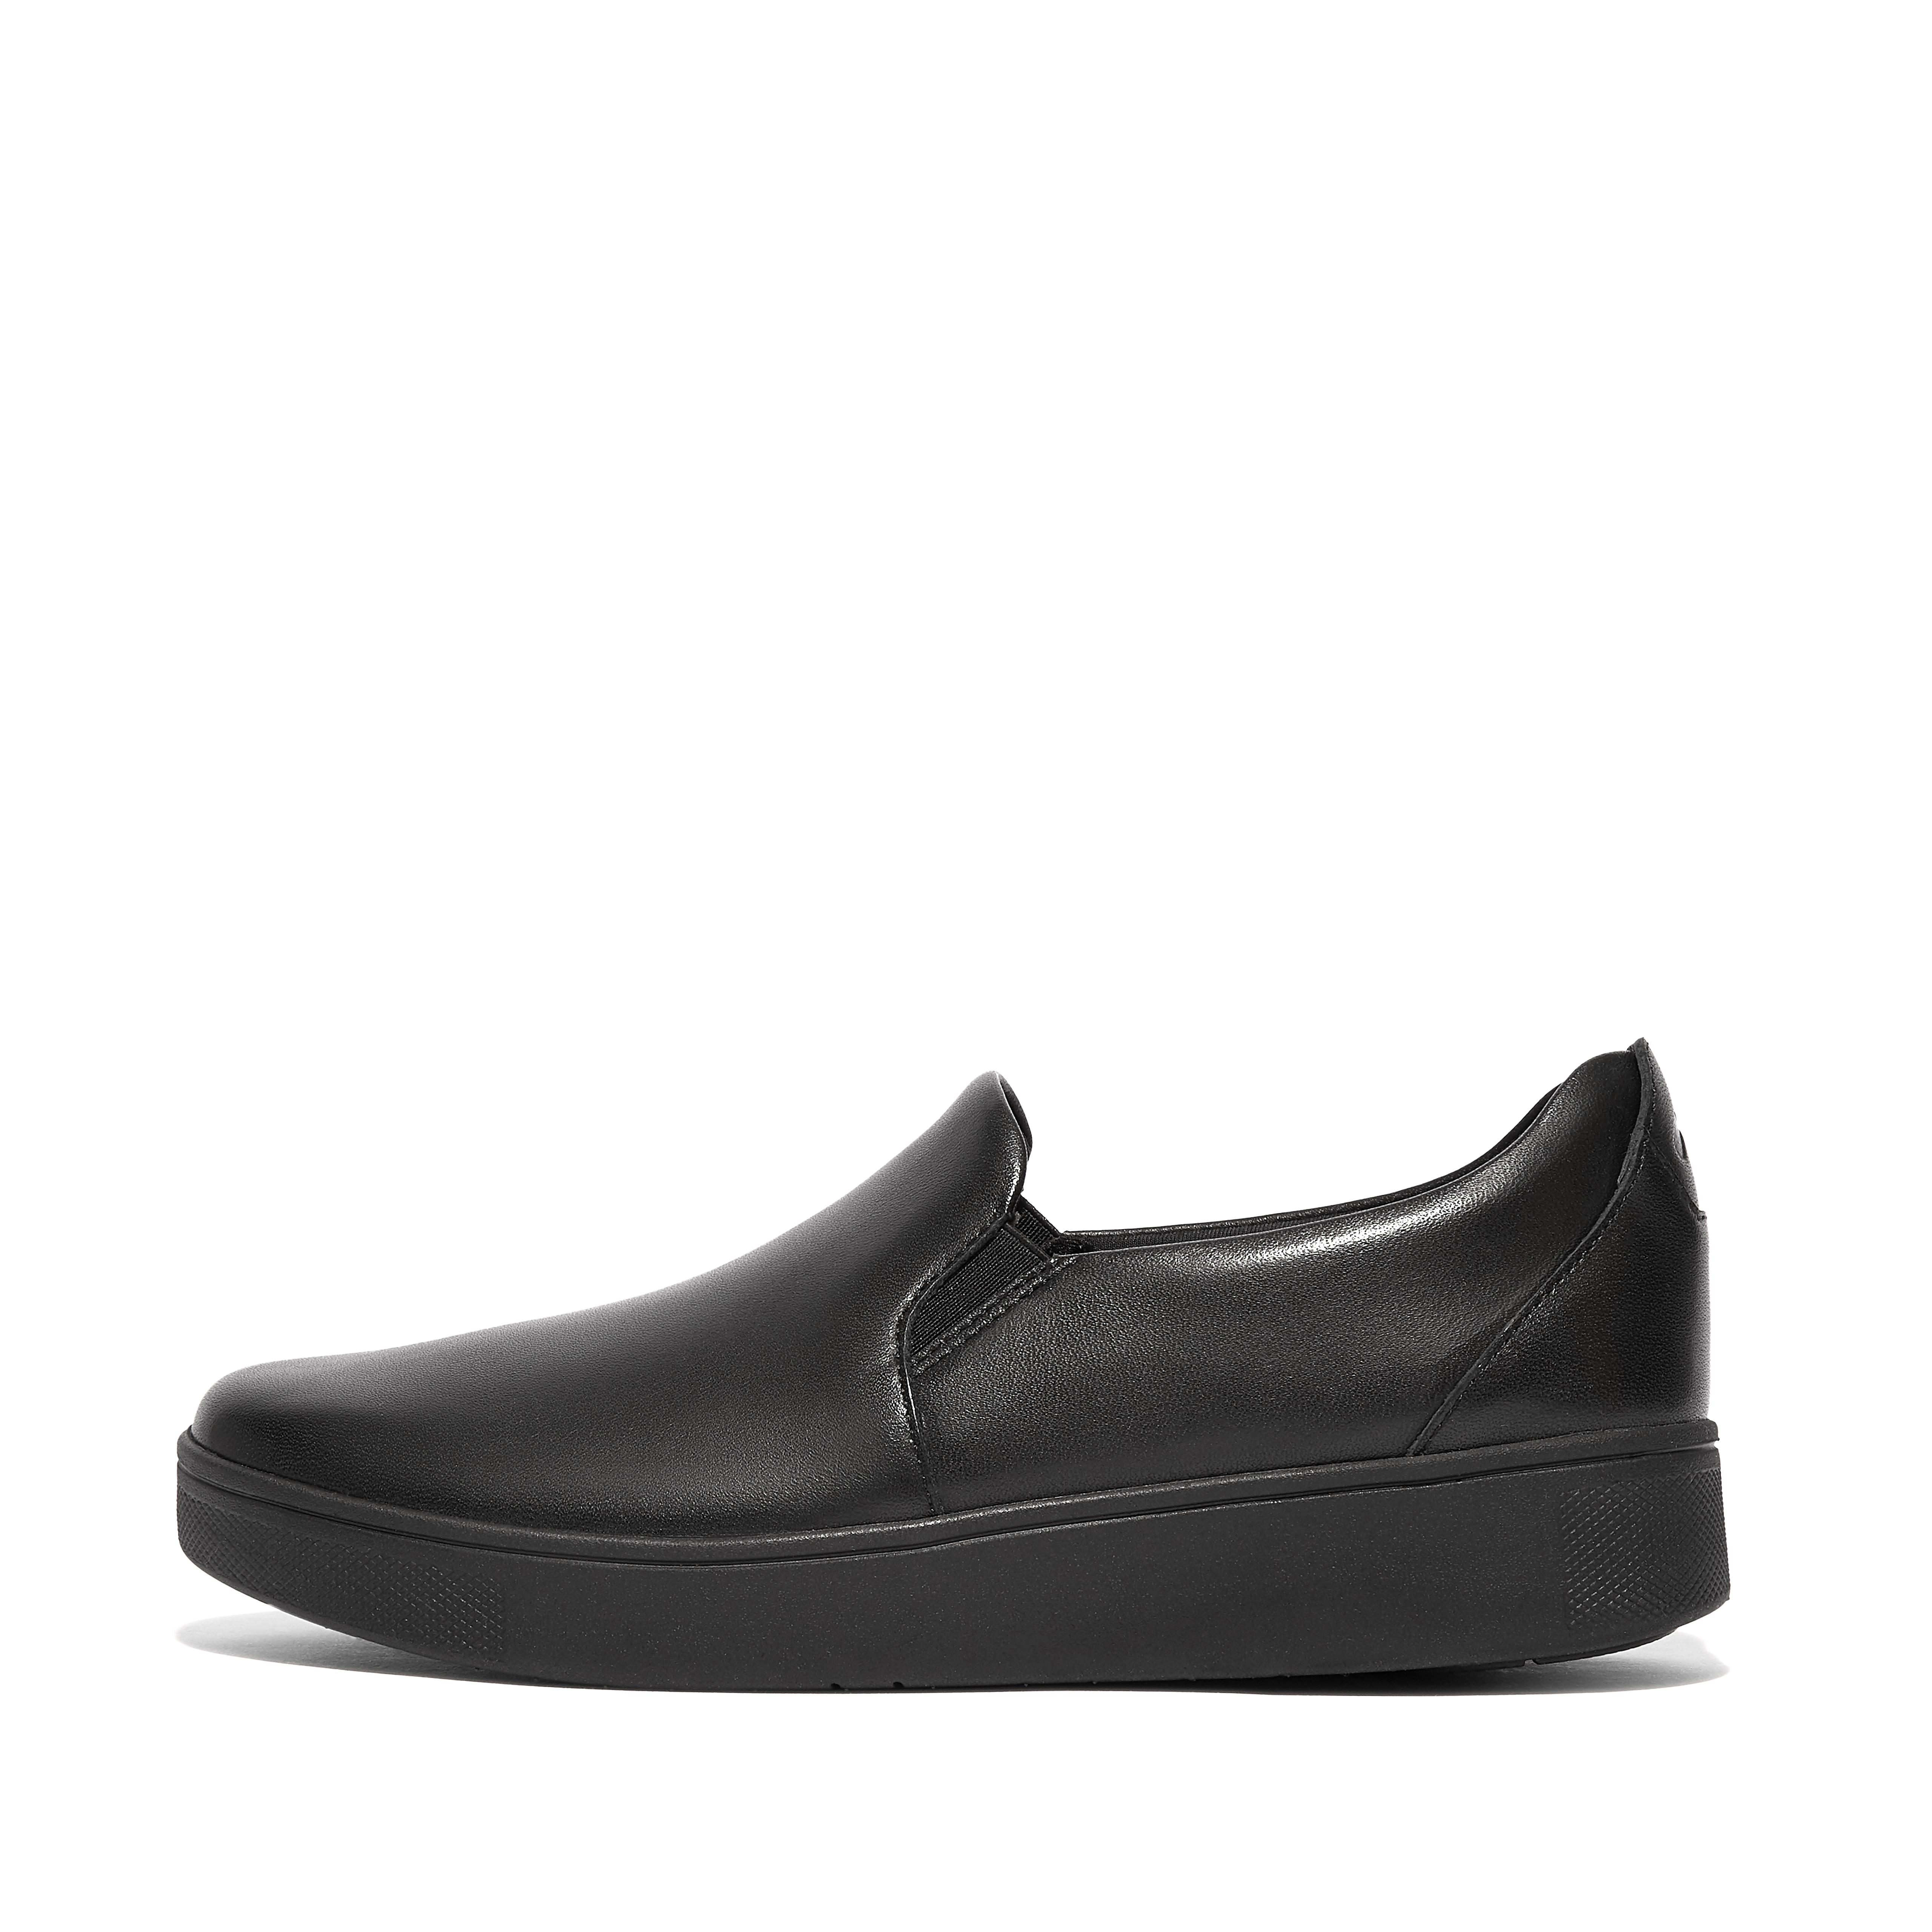 Fitflop Leather Slip-On Skate Sneakers,All Black